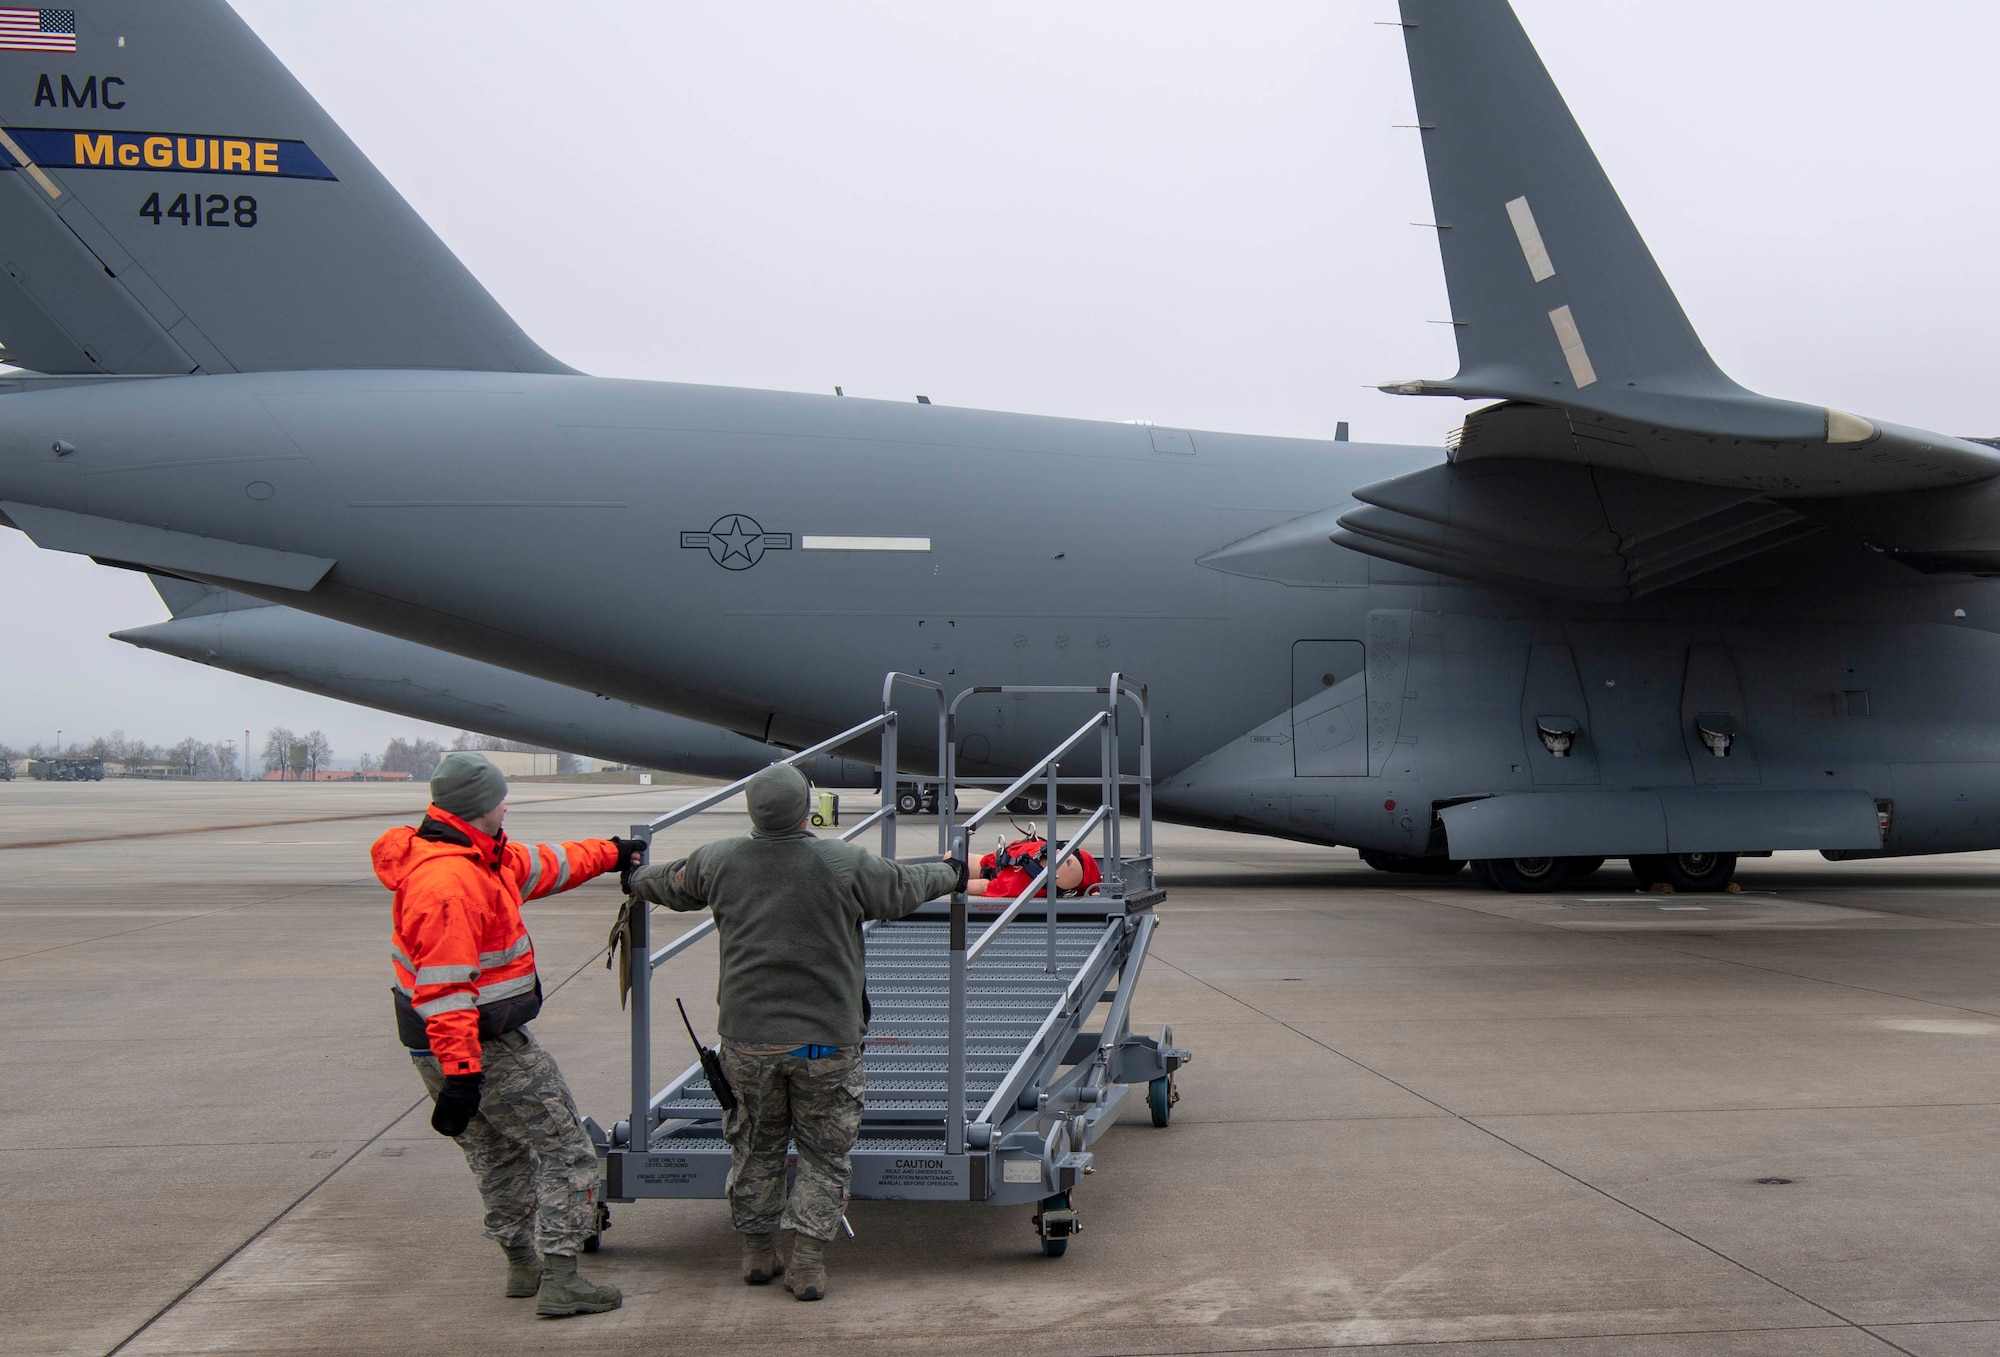 U.S. Air Force Staff Sgt. Michael Morrissey, 726th Air Mobility Squadron electrical and environmental systems craftsman, left, and Senior Airman Billy Meyer, C-17 instrument and flight control system journeyman, right, use an aircraft maintenance lift to move a training dummy during a fall protection exercise at Spangdahlem Air Base, Germany, Jan. 23, 2020. The Airmen completed the exercise as part of fall protection training that included the practical exercise, a computer based training and safety harness familiarization. (U.S. Air Force photo by Senior Airman Kyle Cope)